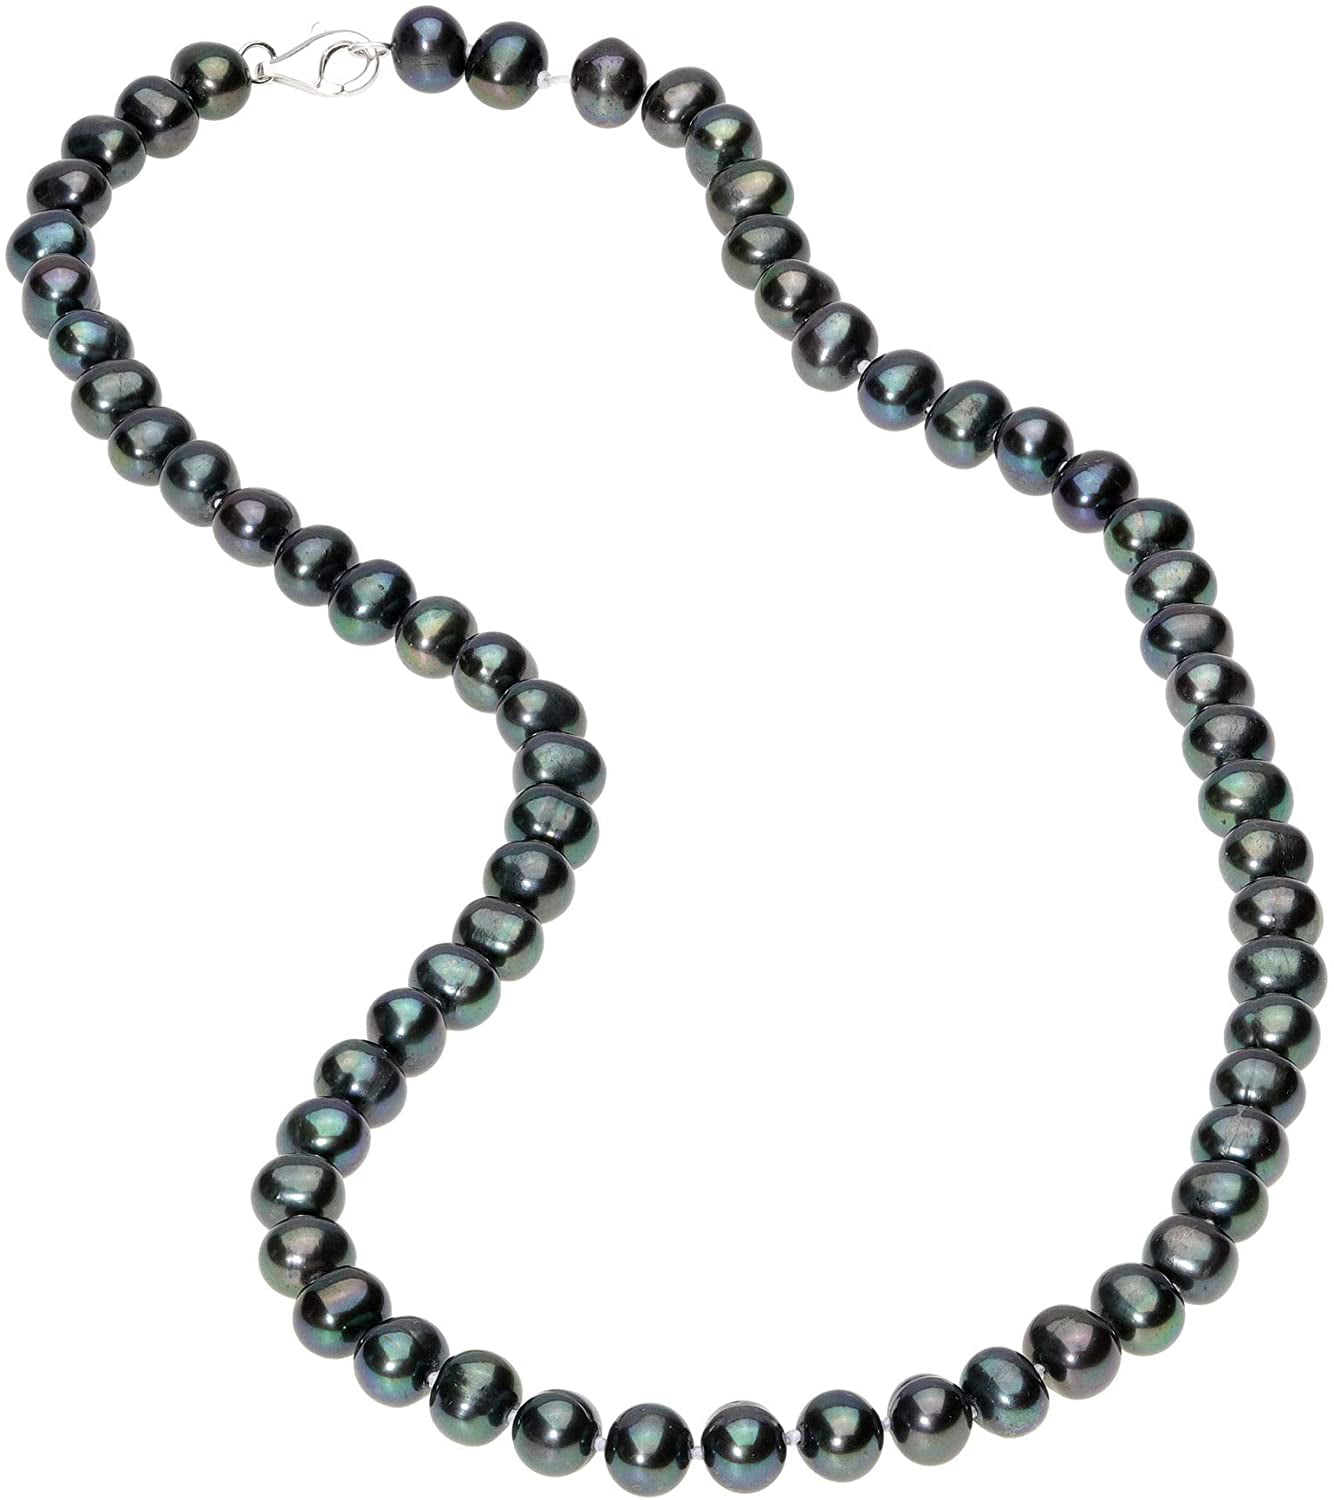 925 Sterling Silver 9-10mm Black Freshwater Cultured Pearl Necklace